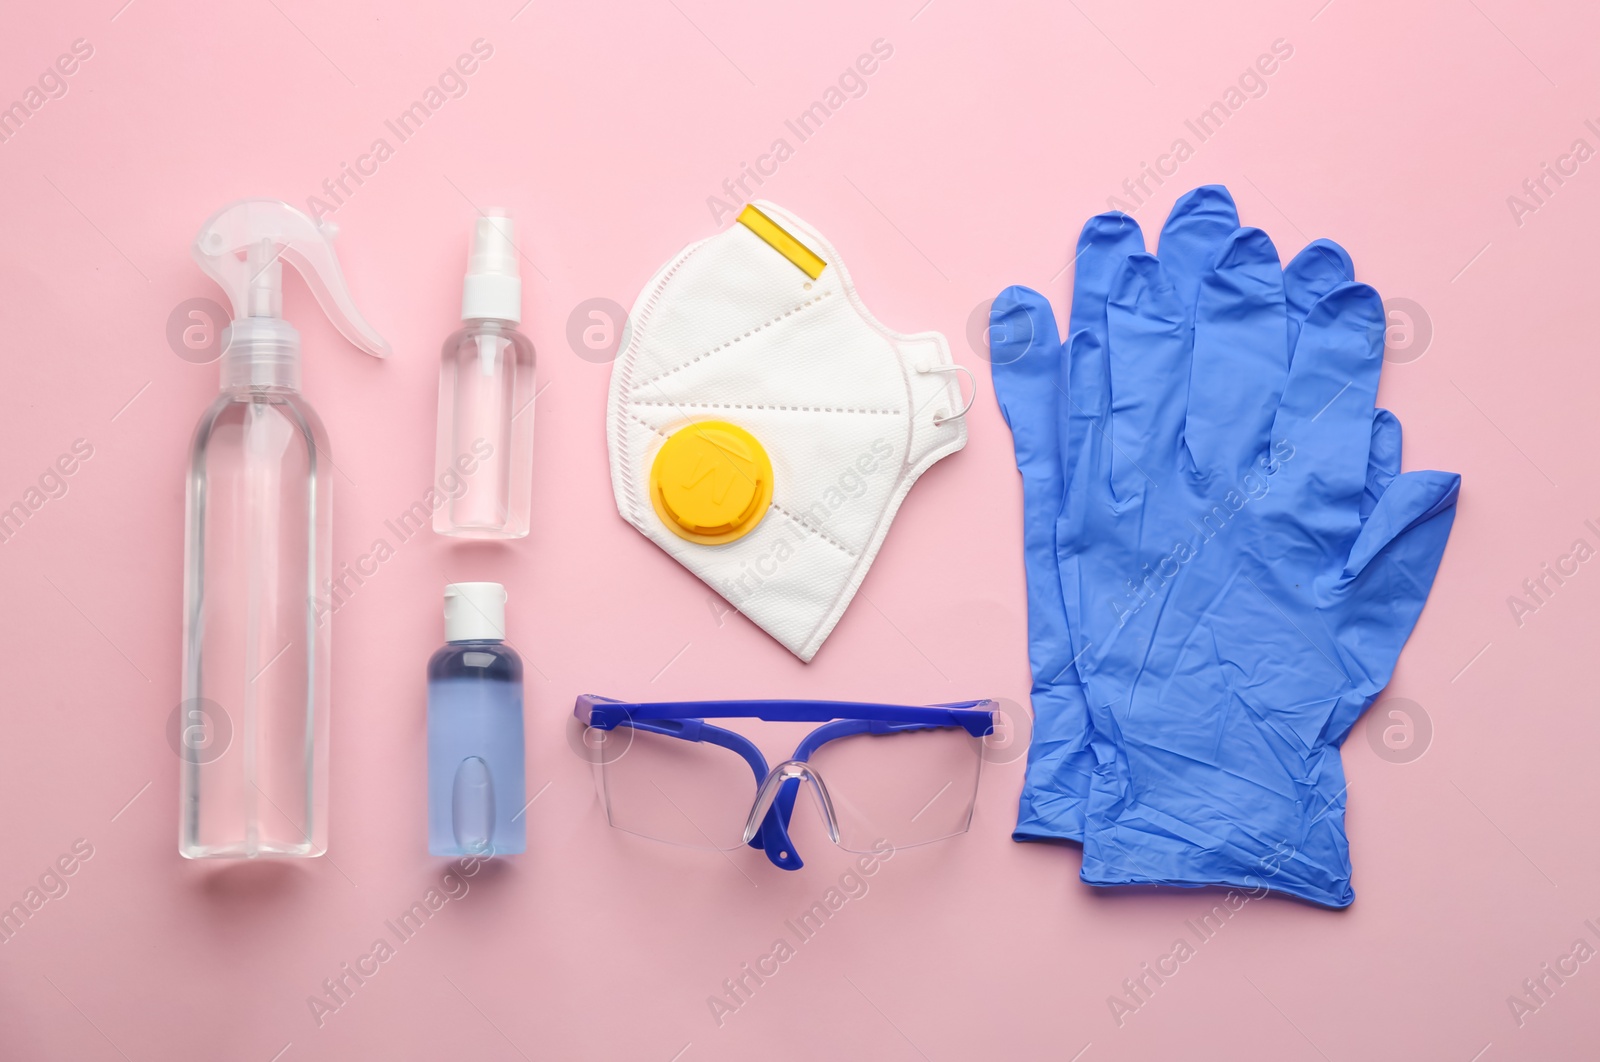 Photo of Flat lay composition with medical gloves, mask and hand sanitizers on pink background